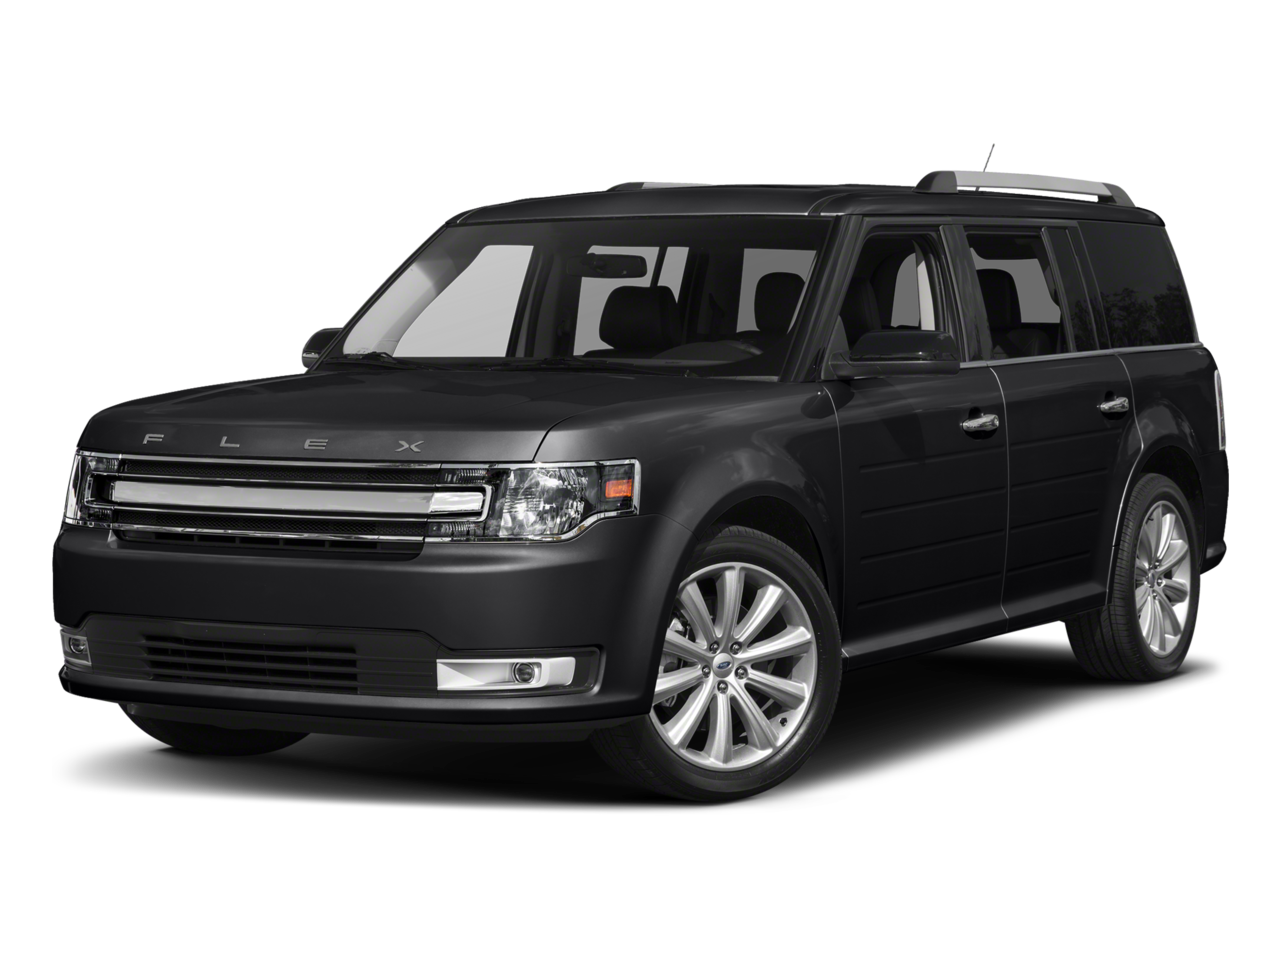 2018 Ford Flex Repair: Service and Maintenance Cost